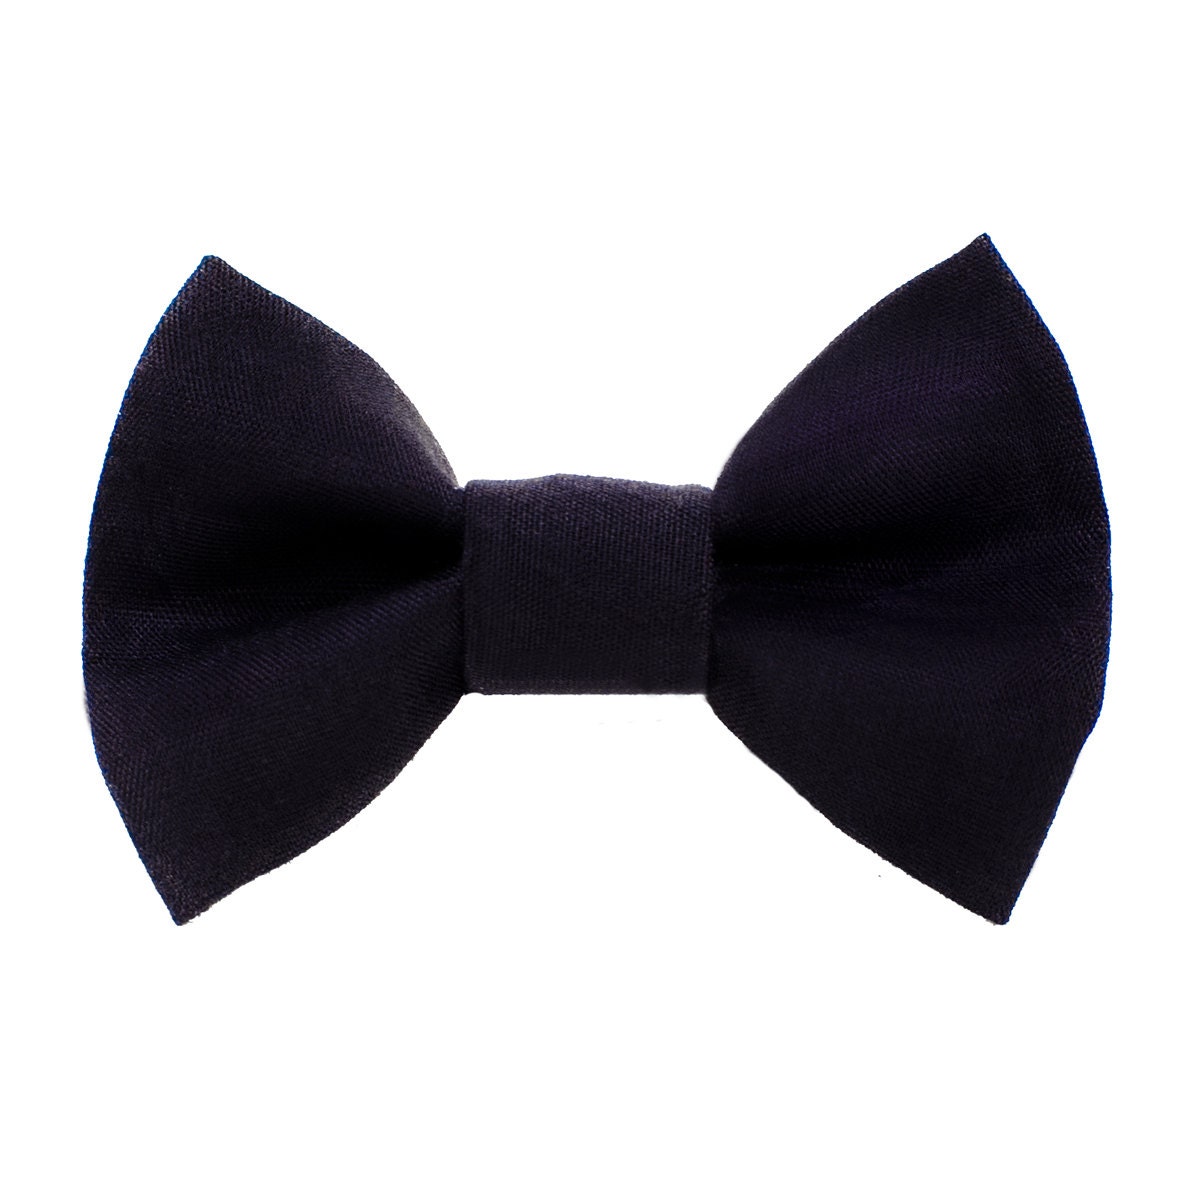 The Back to Business Black Cat Bow Tie by sweetpicklesdesigns